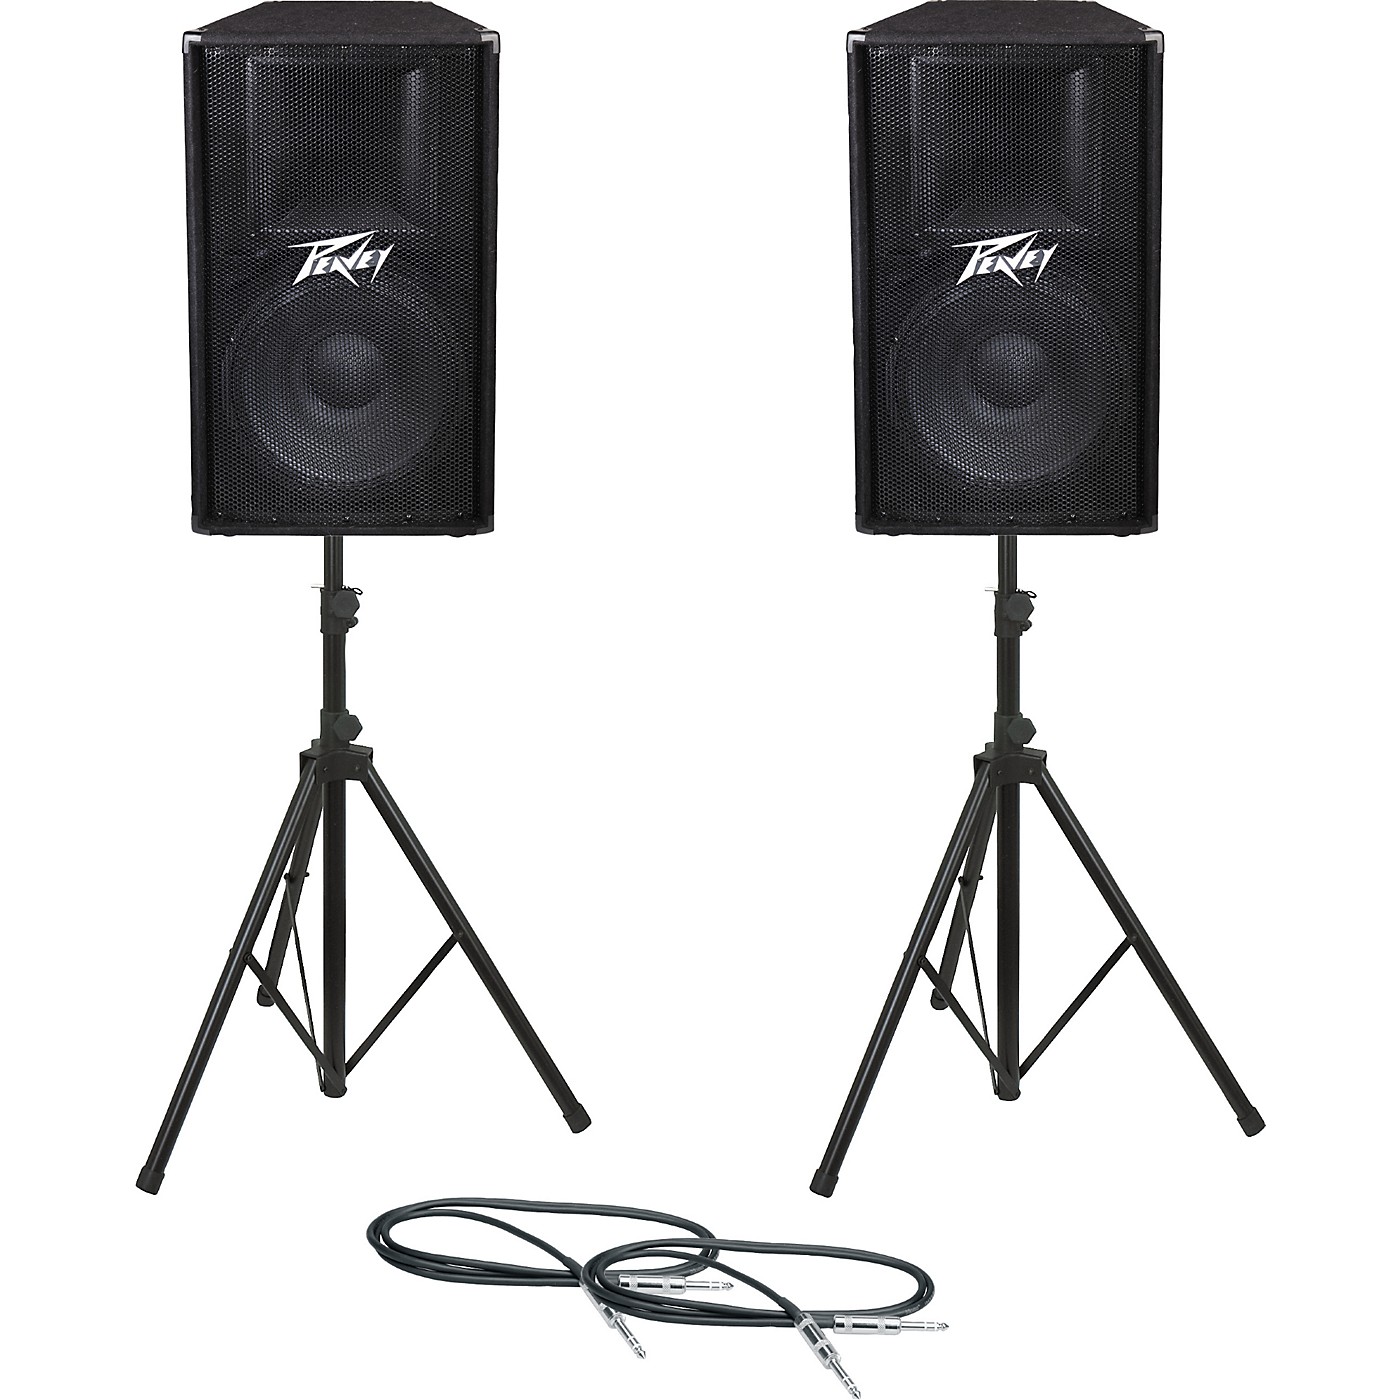 Peavey PV115 Speaker Pair with Stands and Cables thumbnail